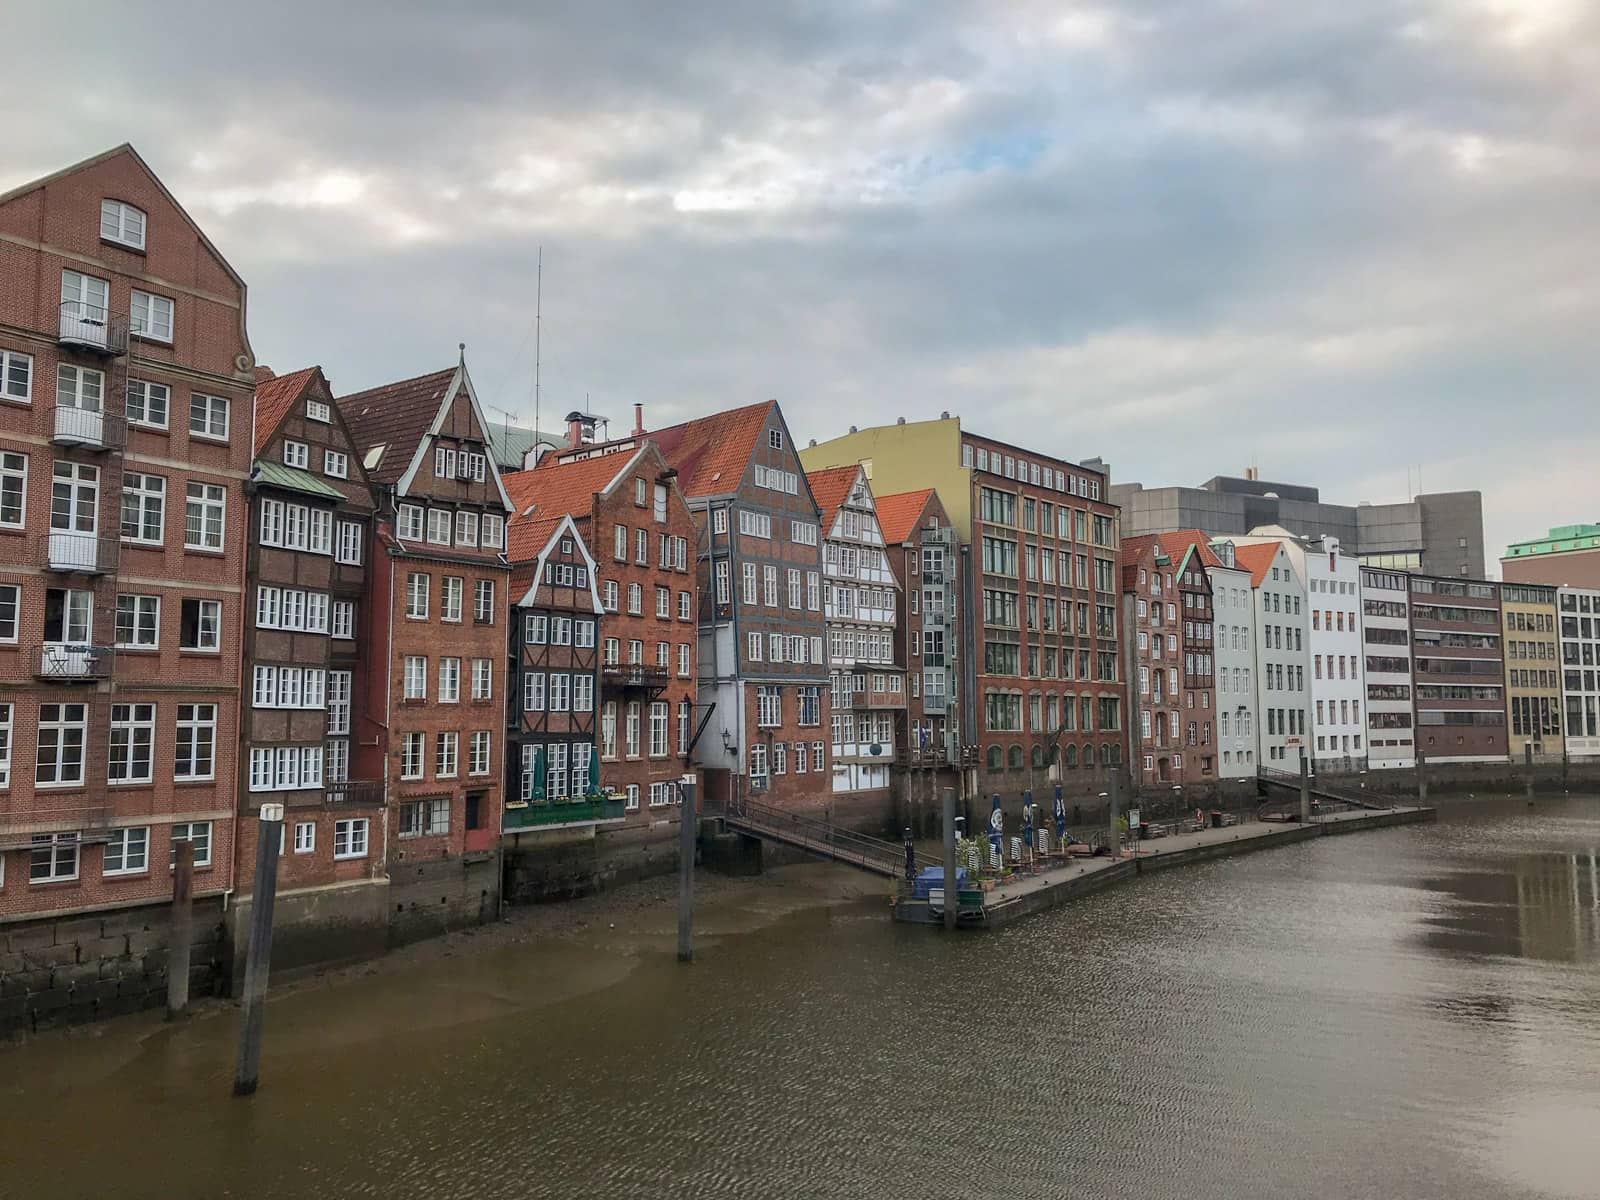 Some large, multi-storey terrace-like houses on the bank of a river, as seen from a distance across the river. It is quite a cloudy day.